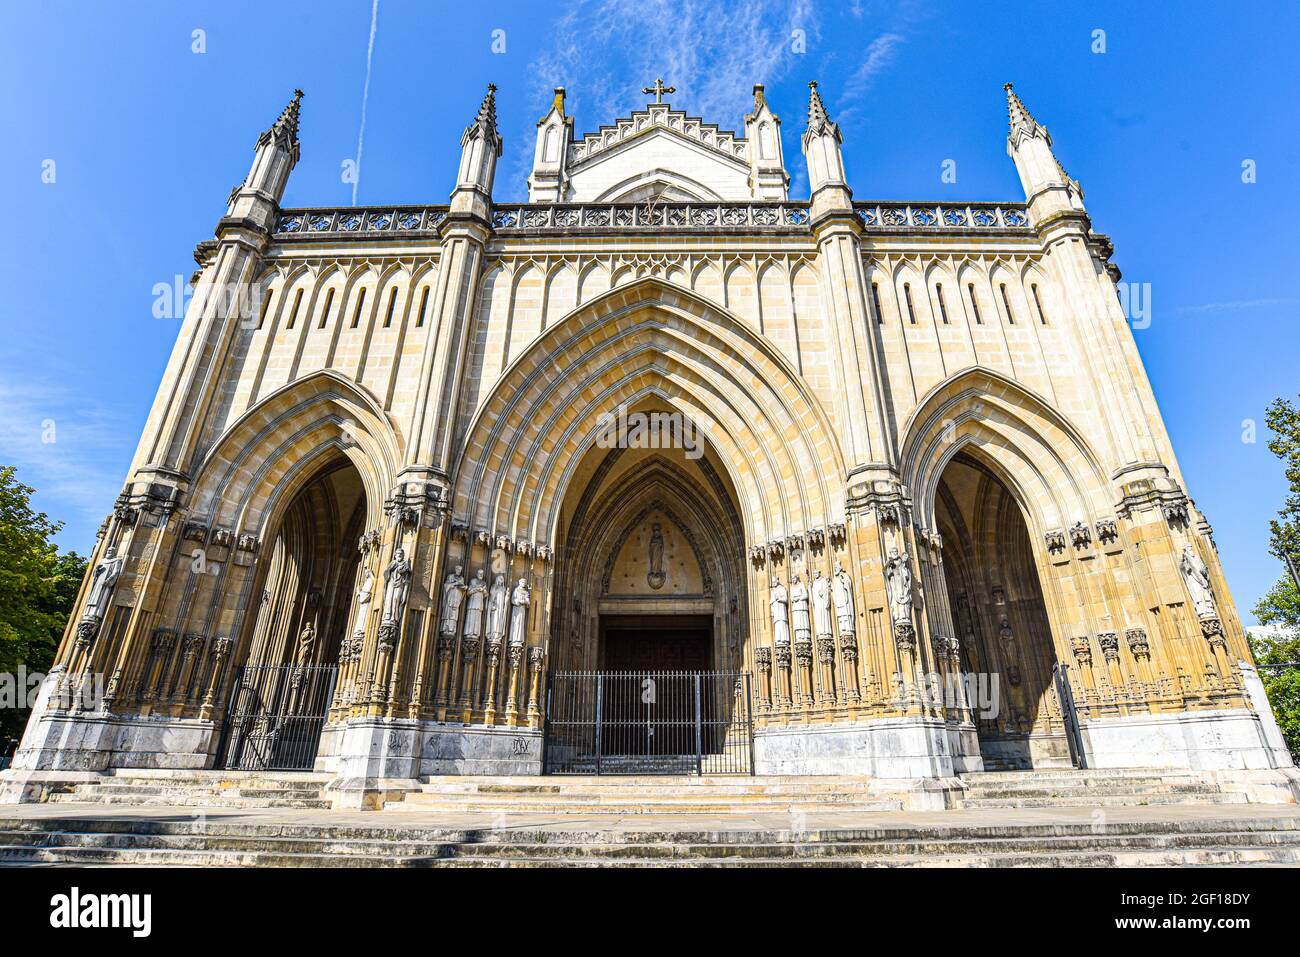 Vitoria-Gasteiz, Spain - 21 Aug, 2021: Exterior Views of the Cathedral of Santa Maria (or New Cathedral) in Vitoria-Gasteiz, Basque Country, Spain Stock Photo